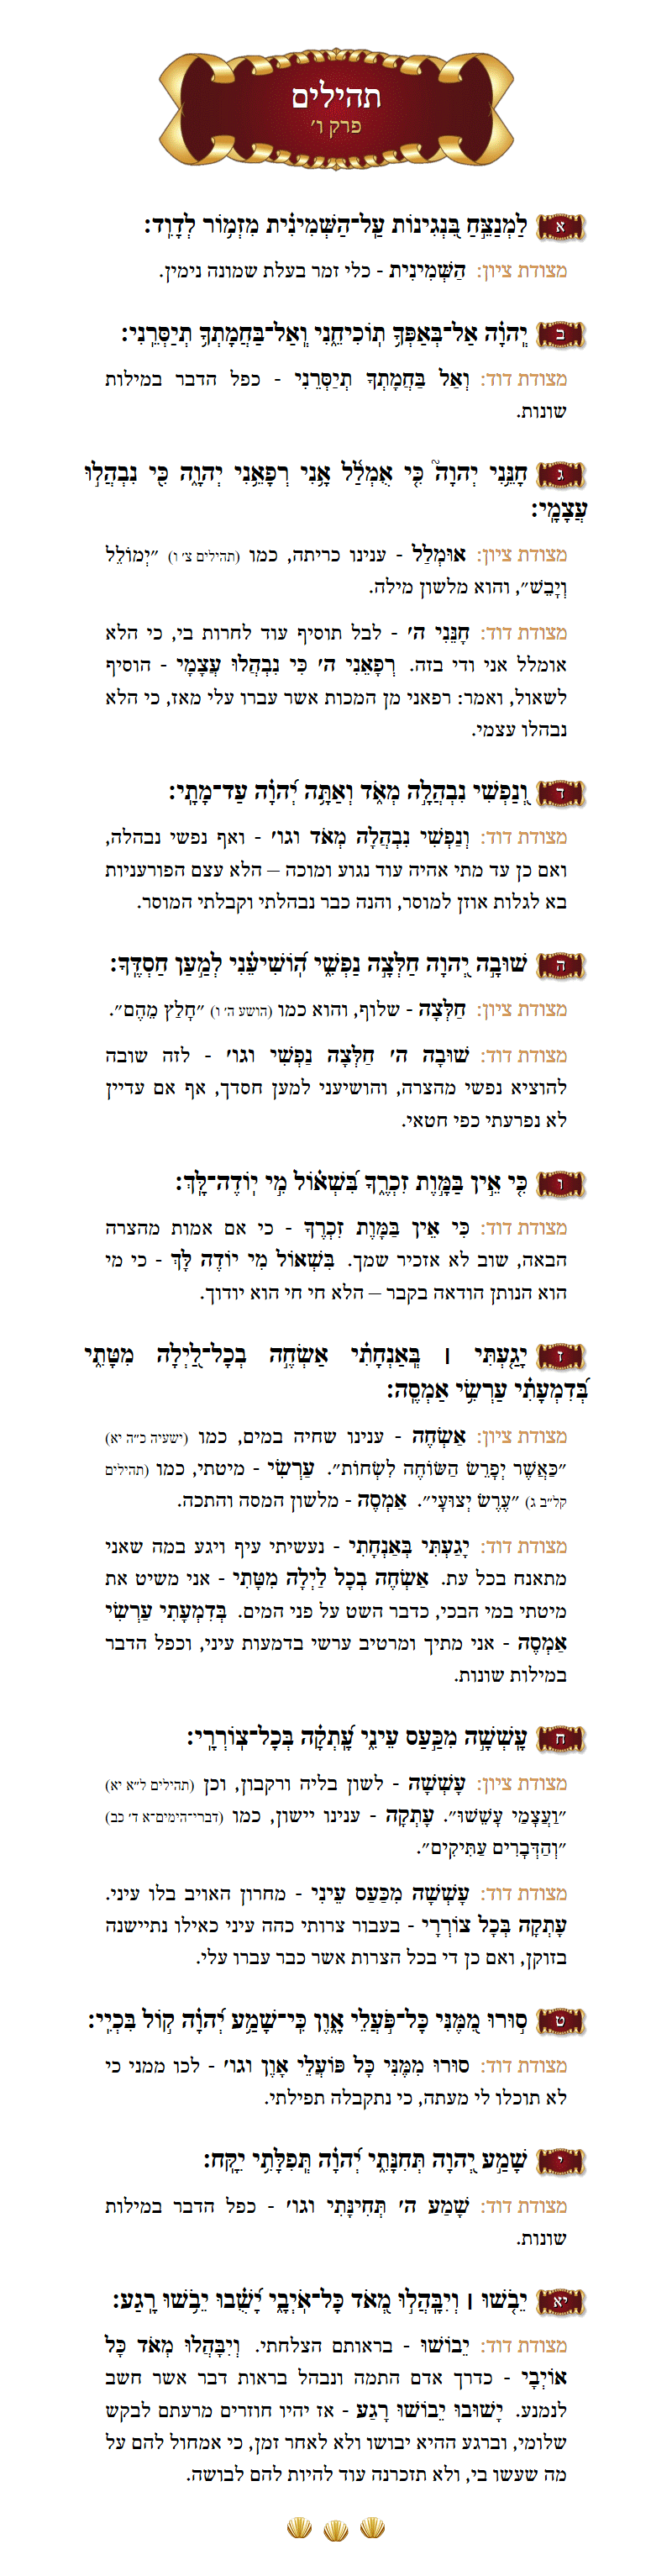 Sefer Tehillim Chapter 60 with commentary